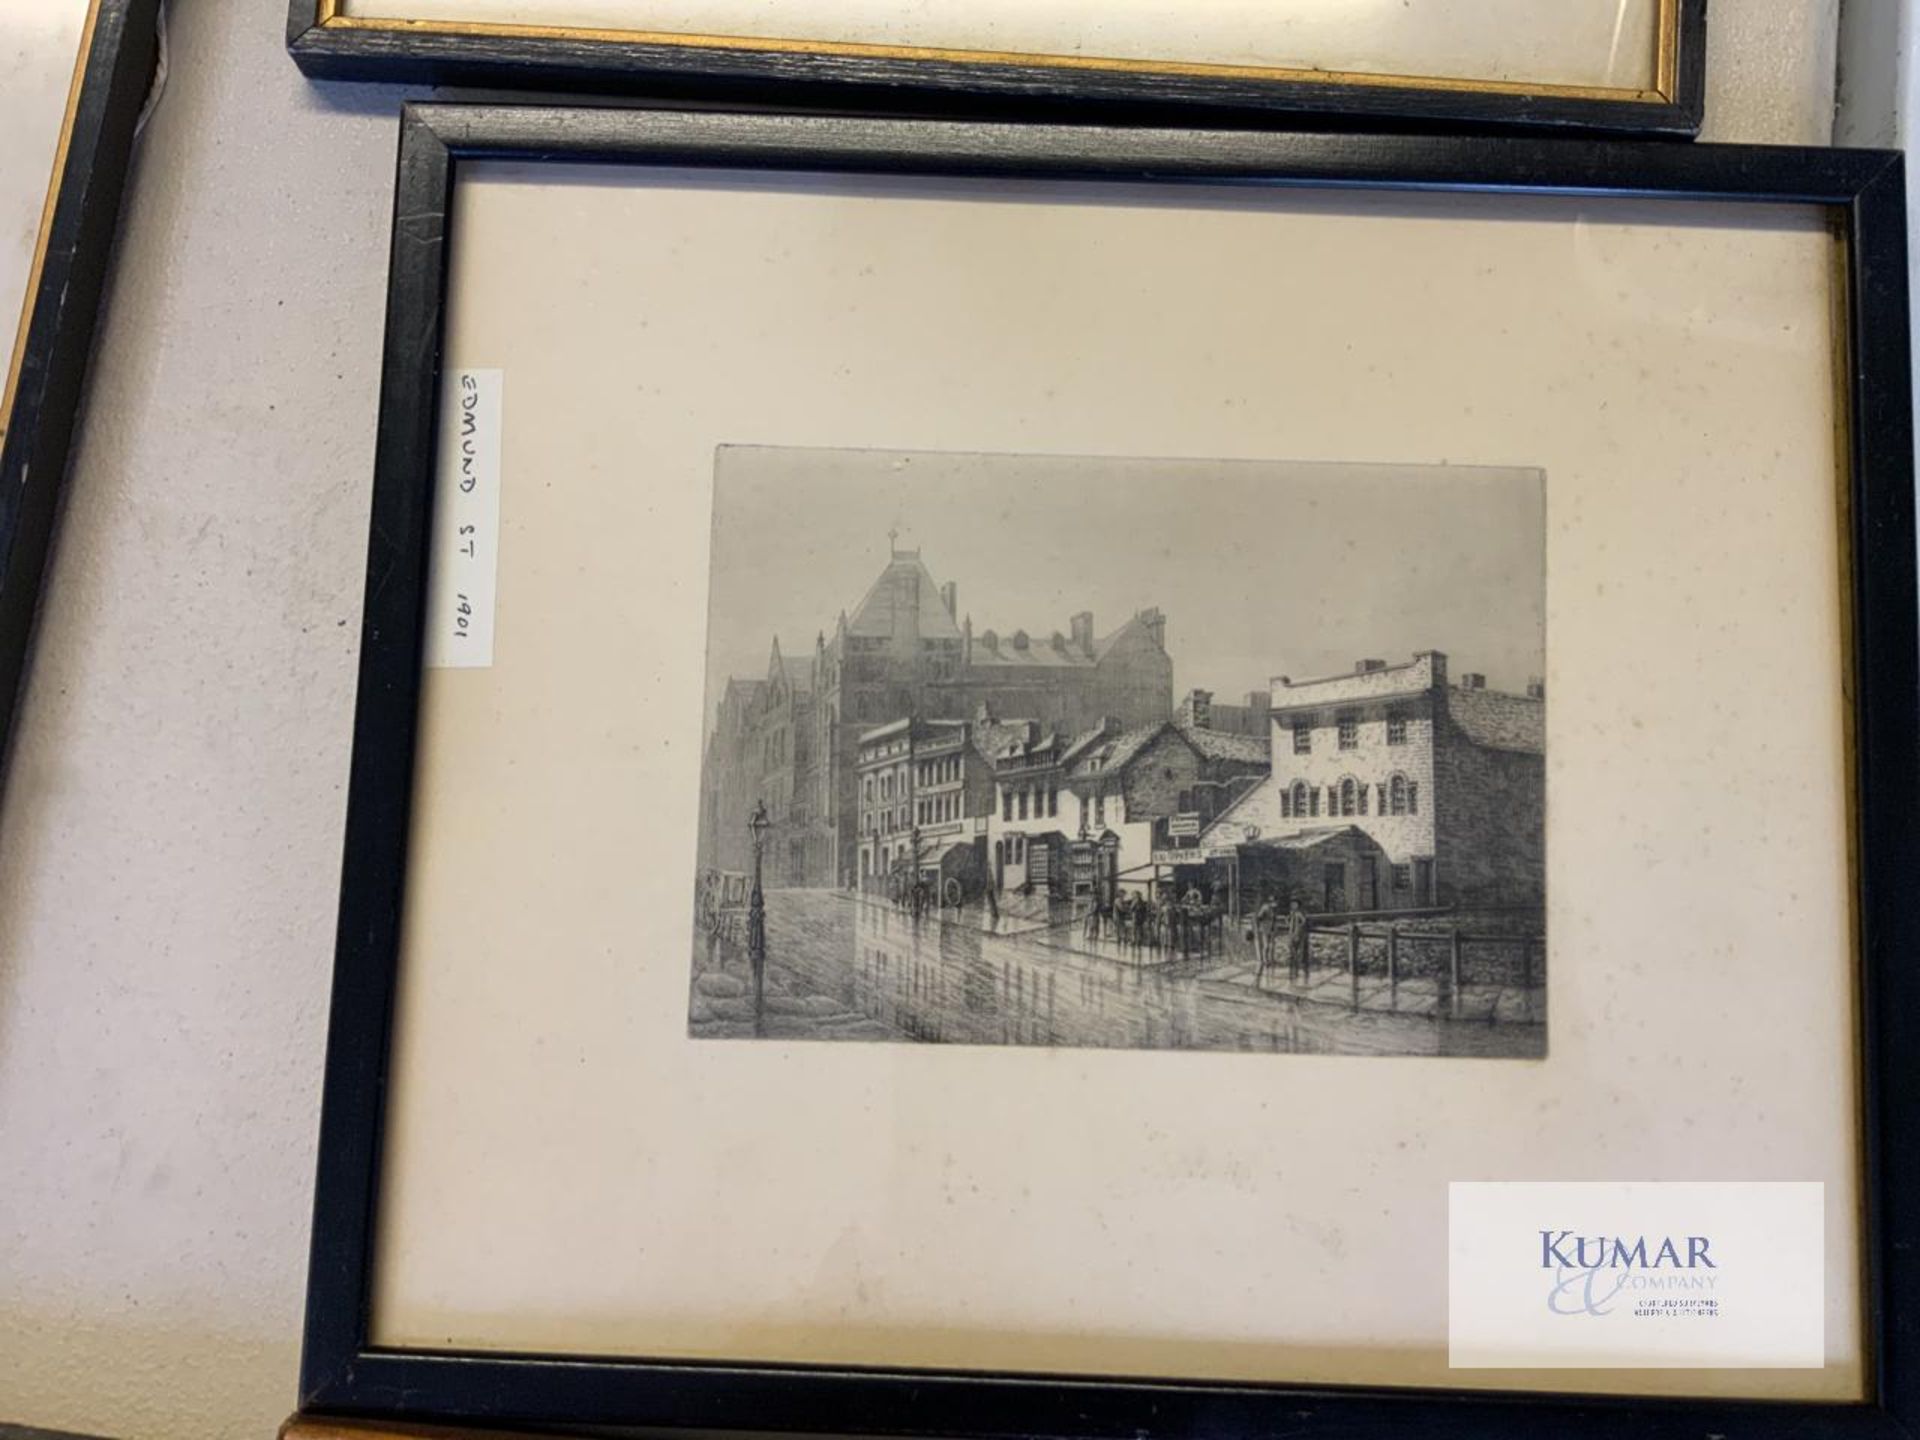 23: Various Pictures, Paintings, Drawings Etc - As Shown Many Historic Images of Birmingham by James - Image 3 of 26